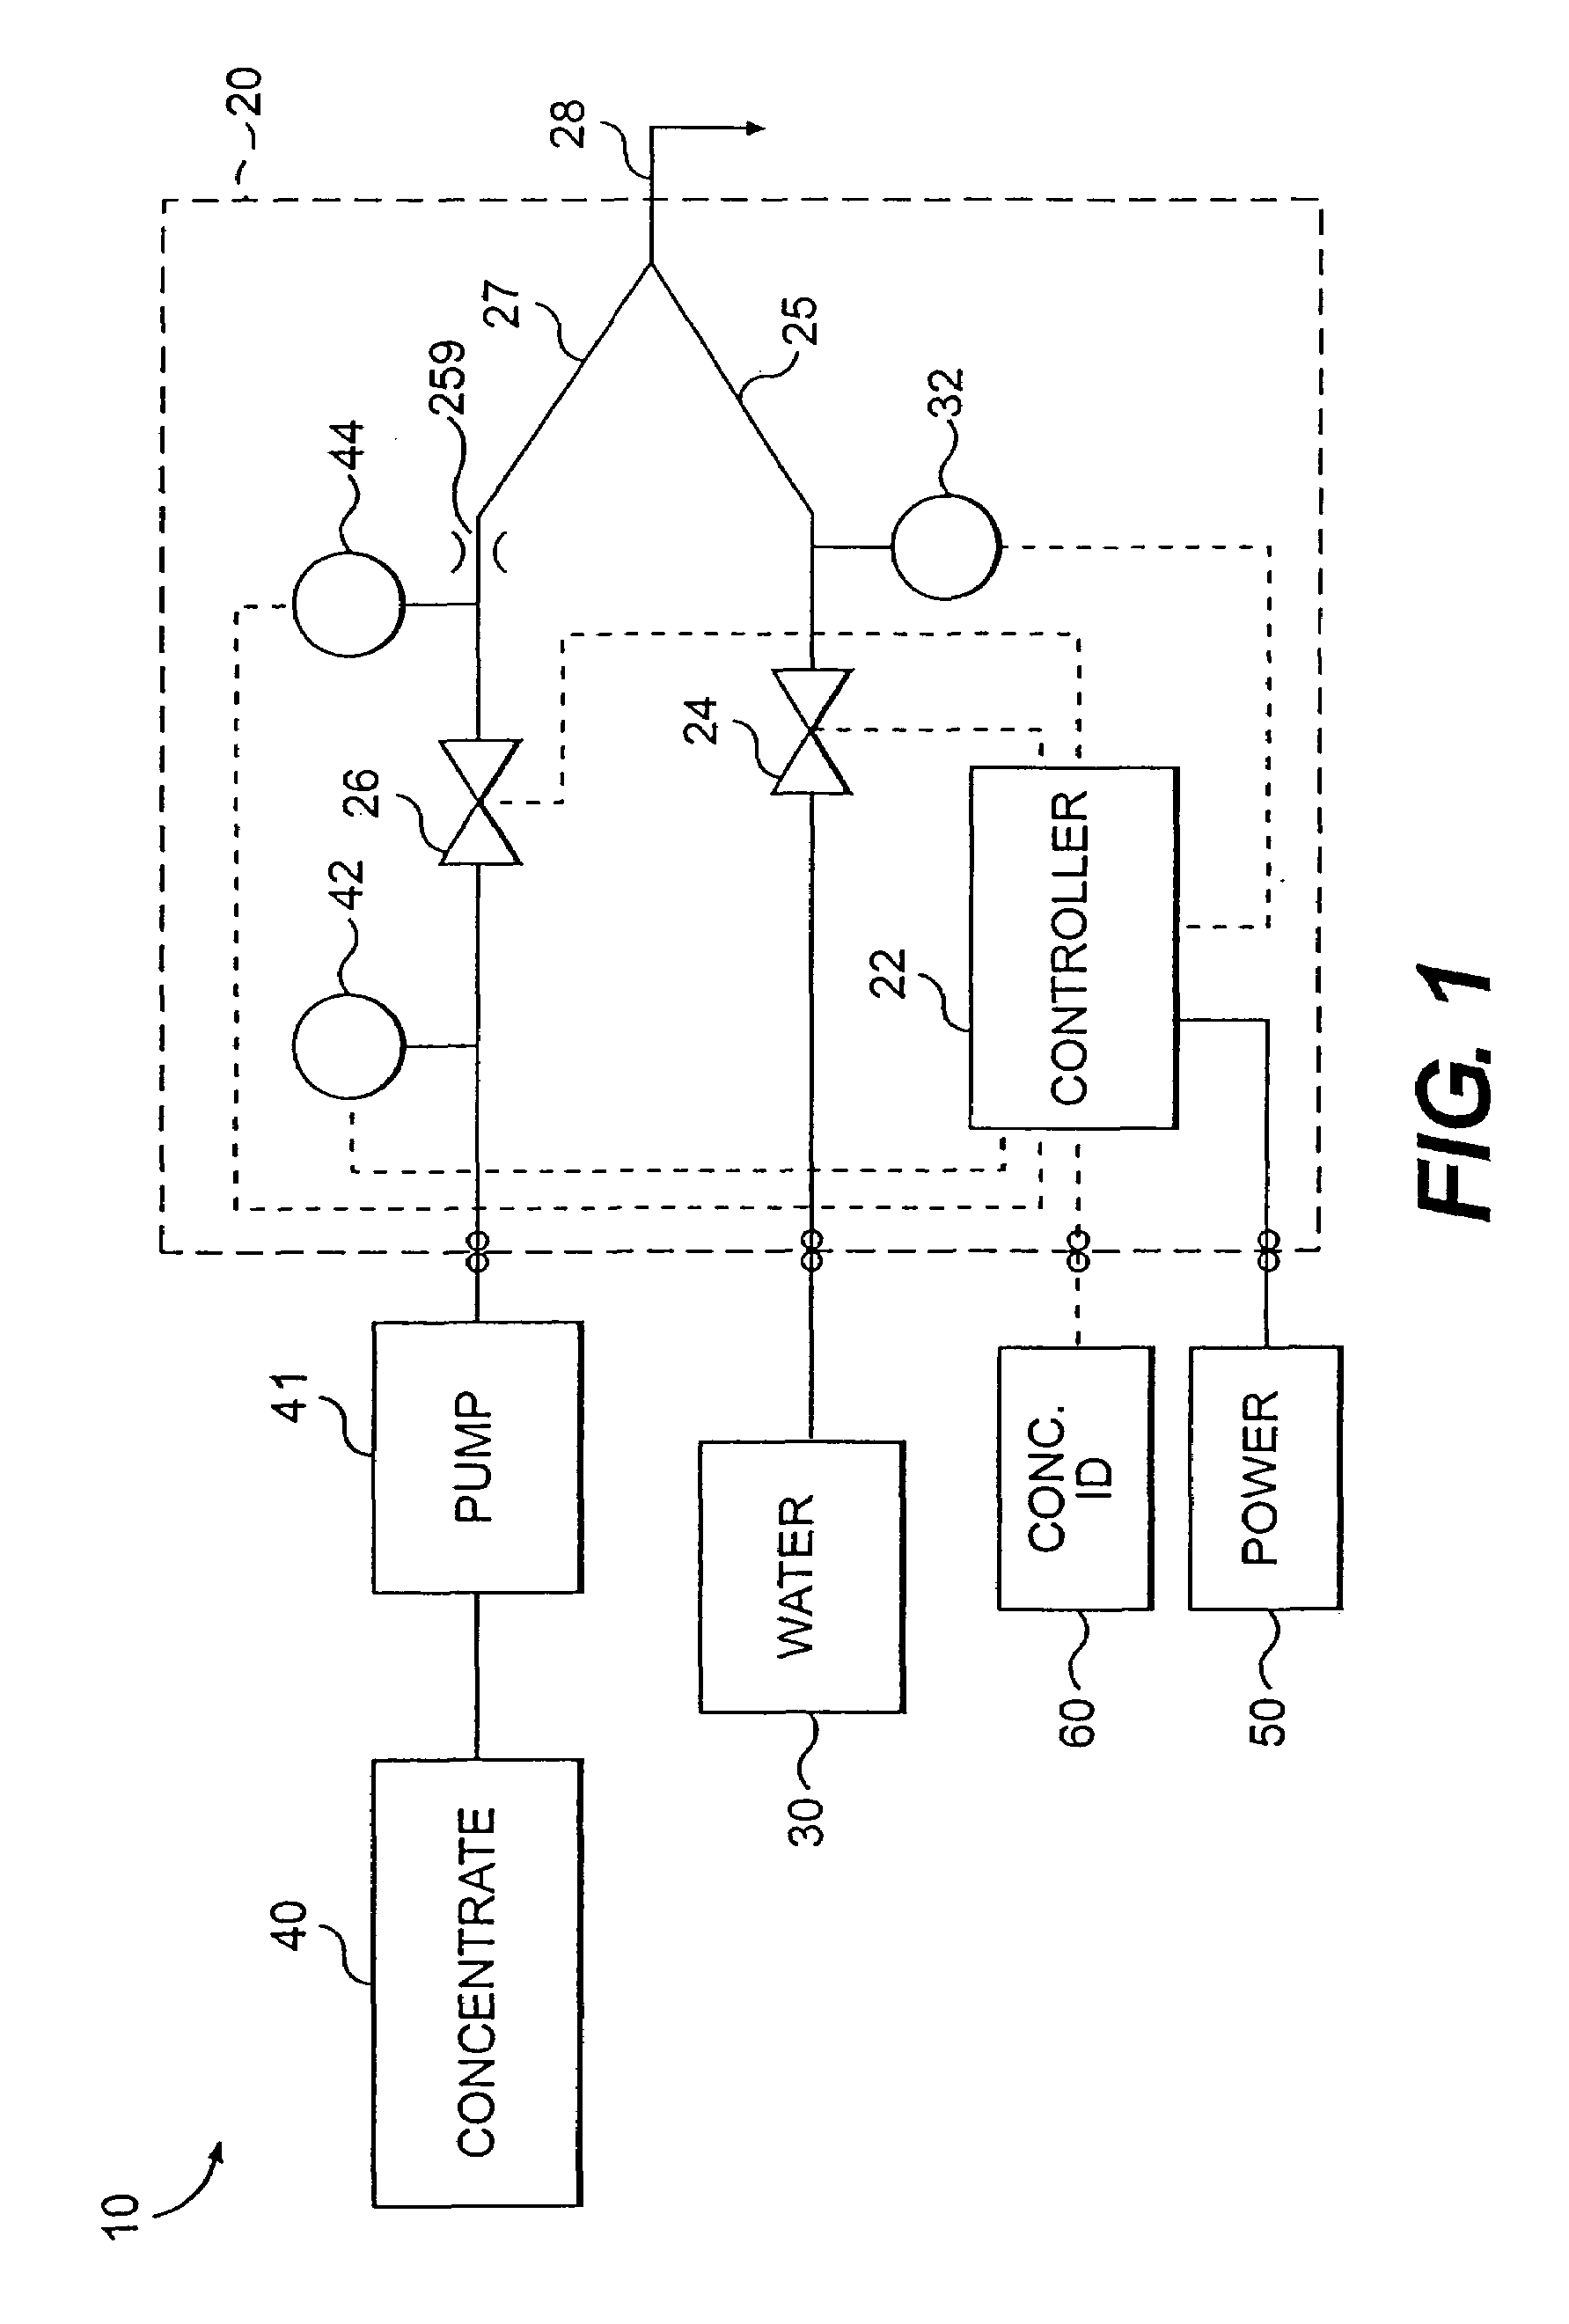 Beverage forming and dispensing system